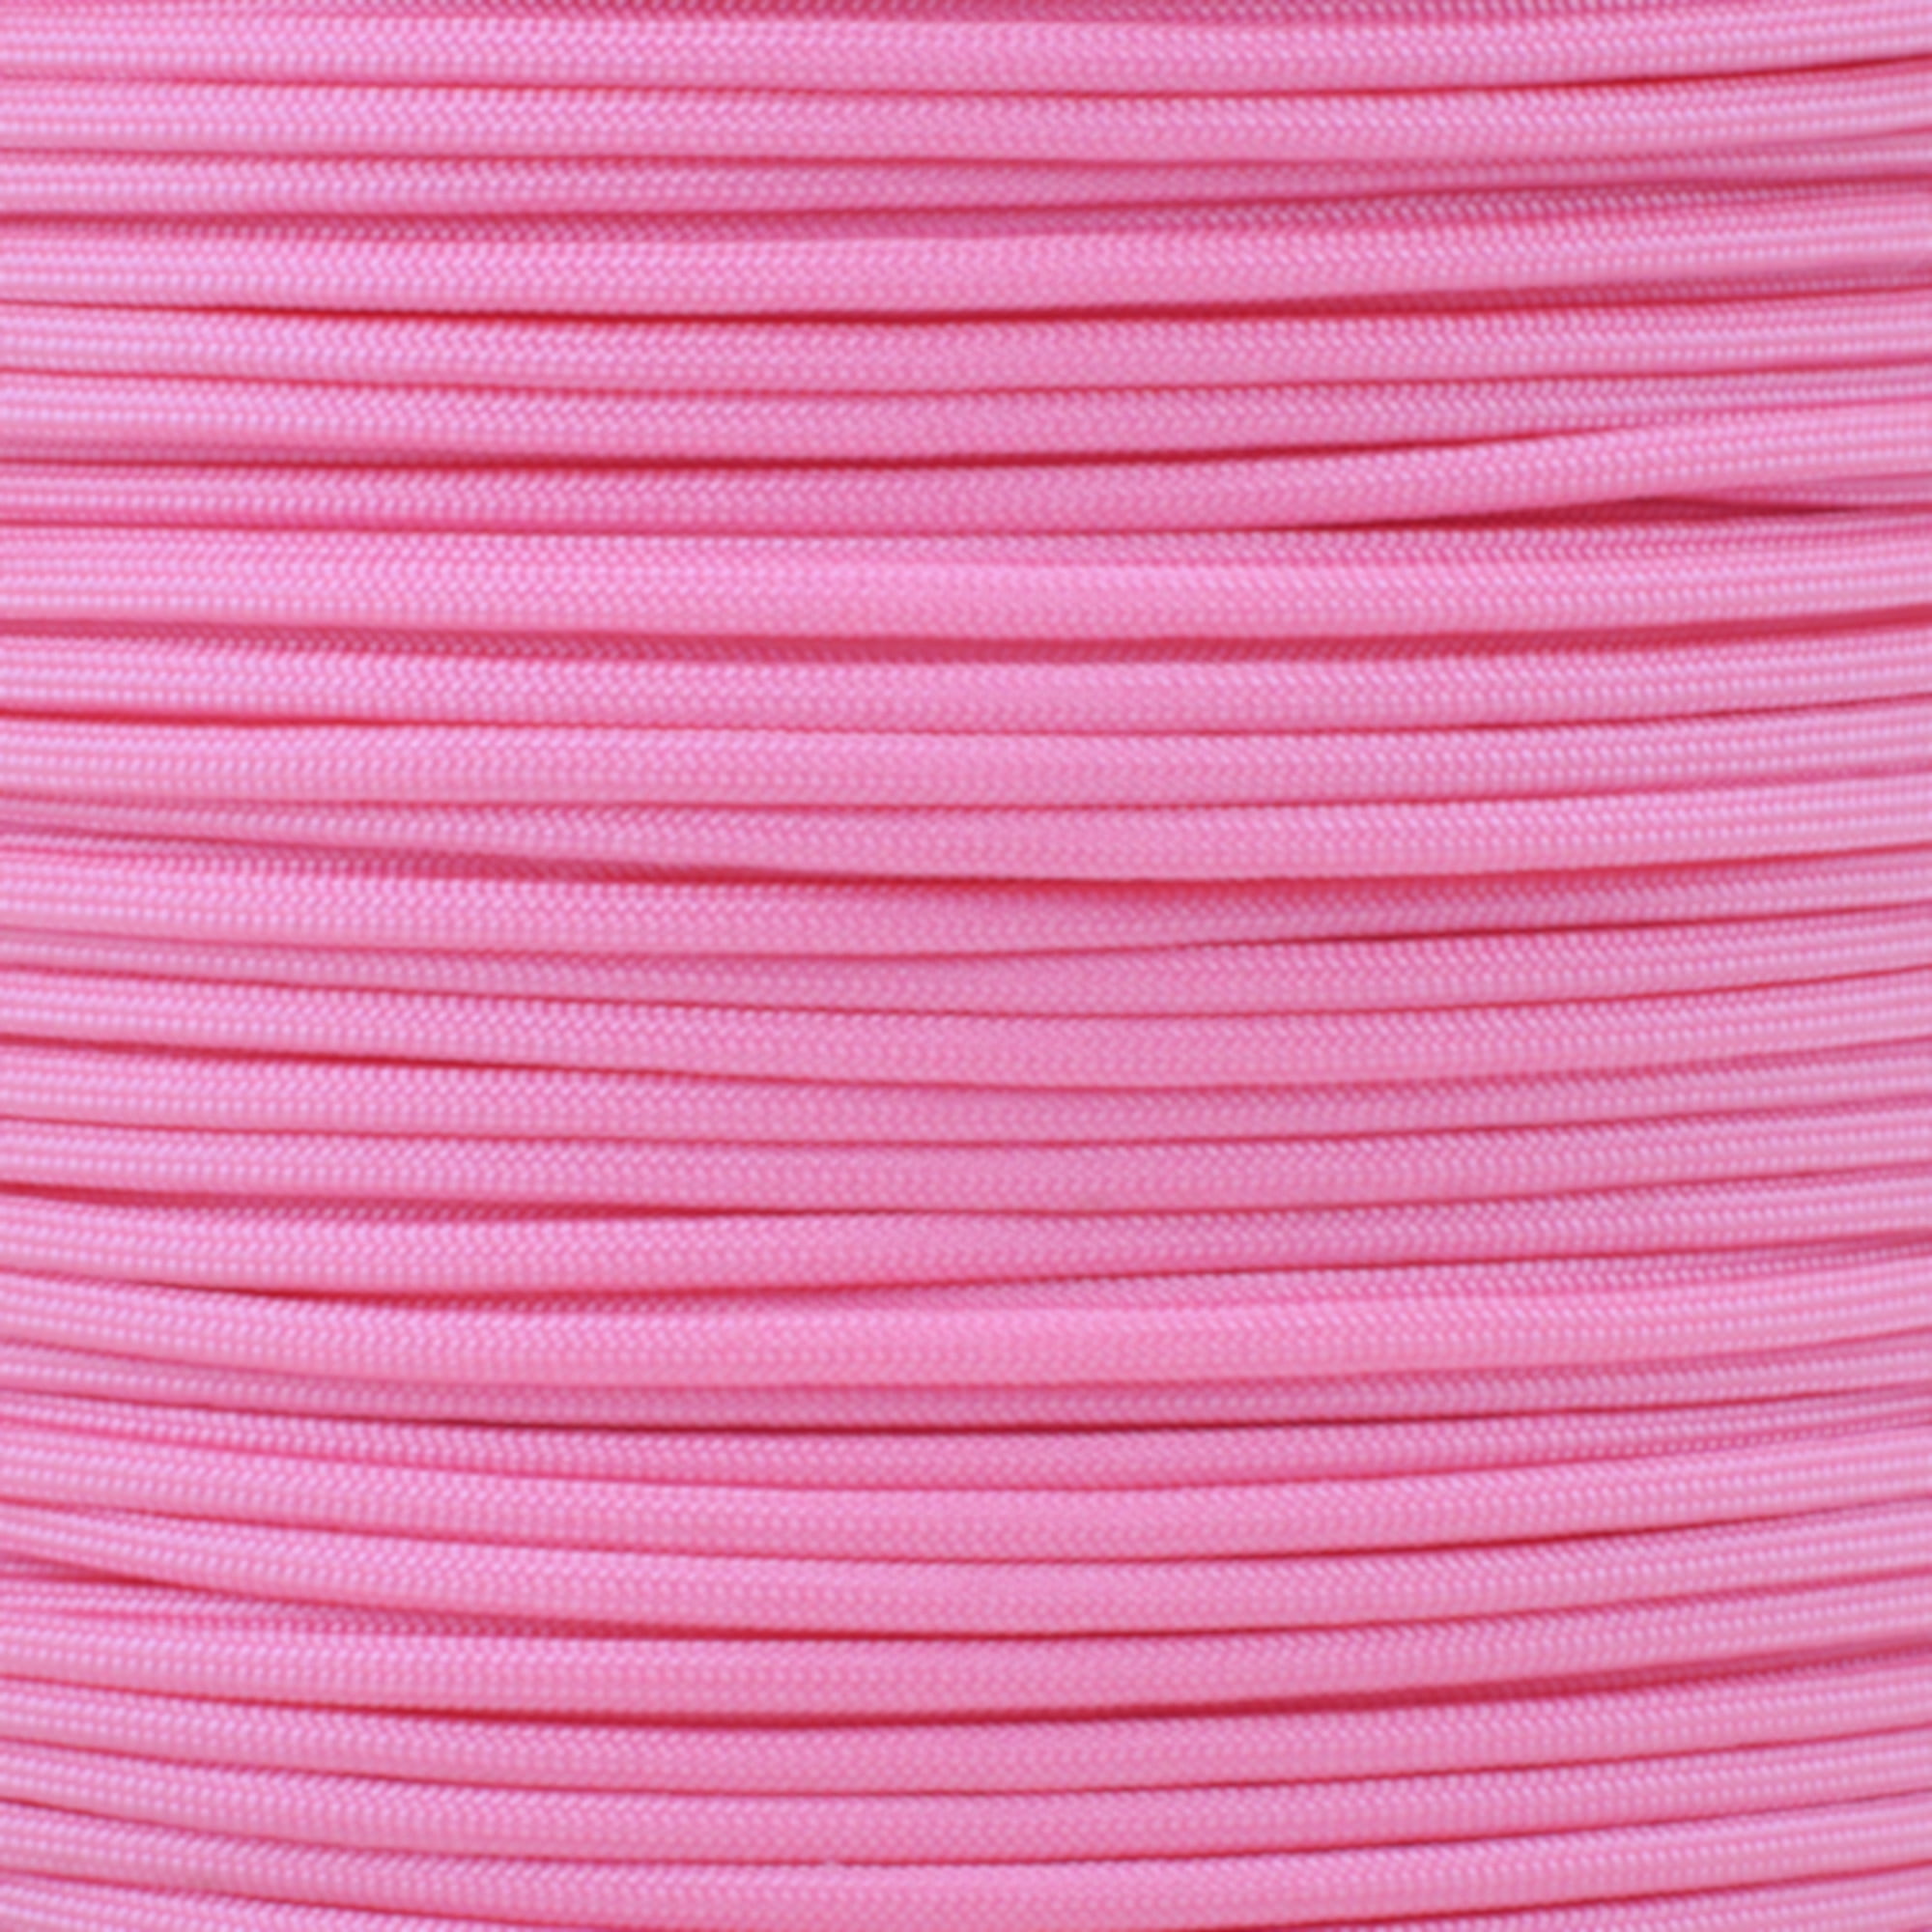 Neon Pink - 550 Paracord with Glow in The Dark Tracers